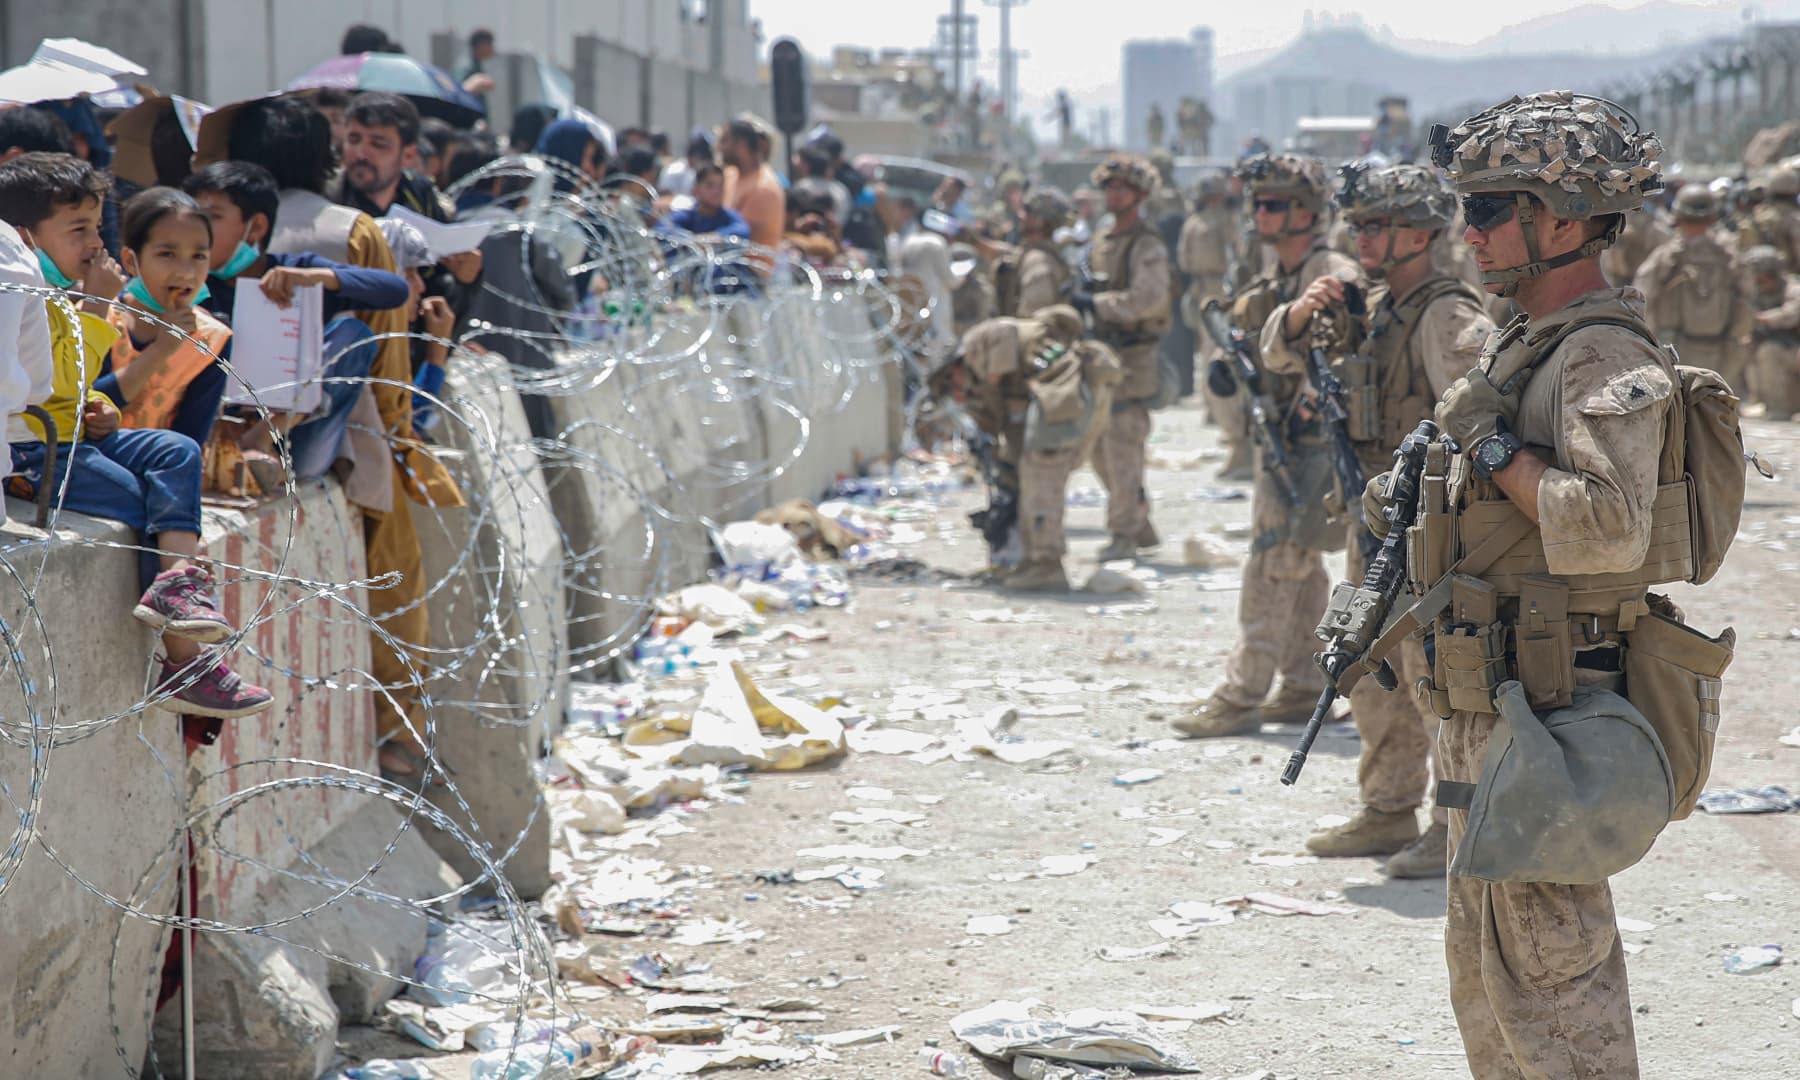 US Marines with Special Purpose Marine Air-Ground Task Force - Crisis Response - Central Command, provide assistance during an evacuation at Hamid Karzai International Airport in Kabul, Afghanistan on August 20, 2021. — AP